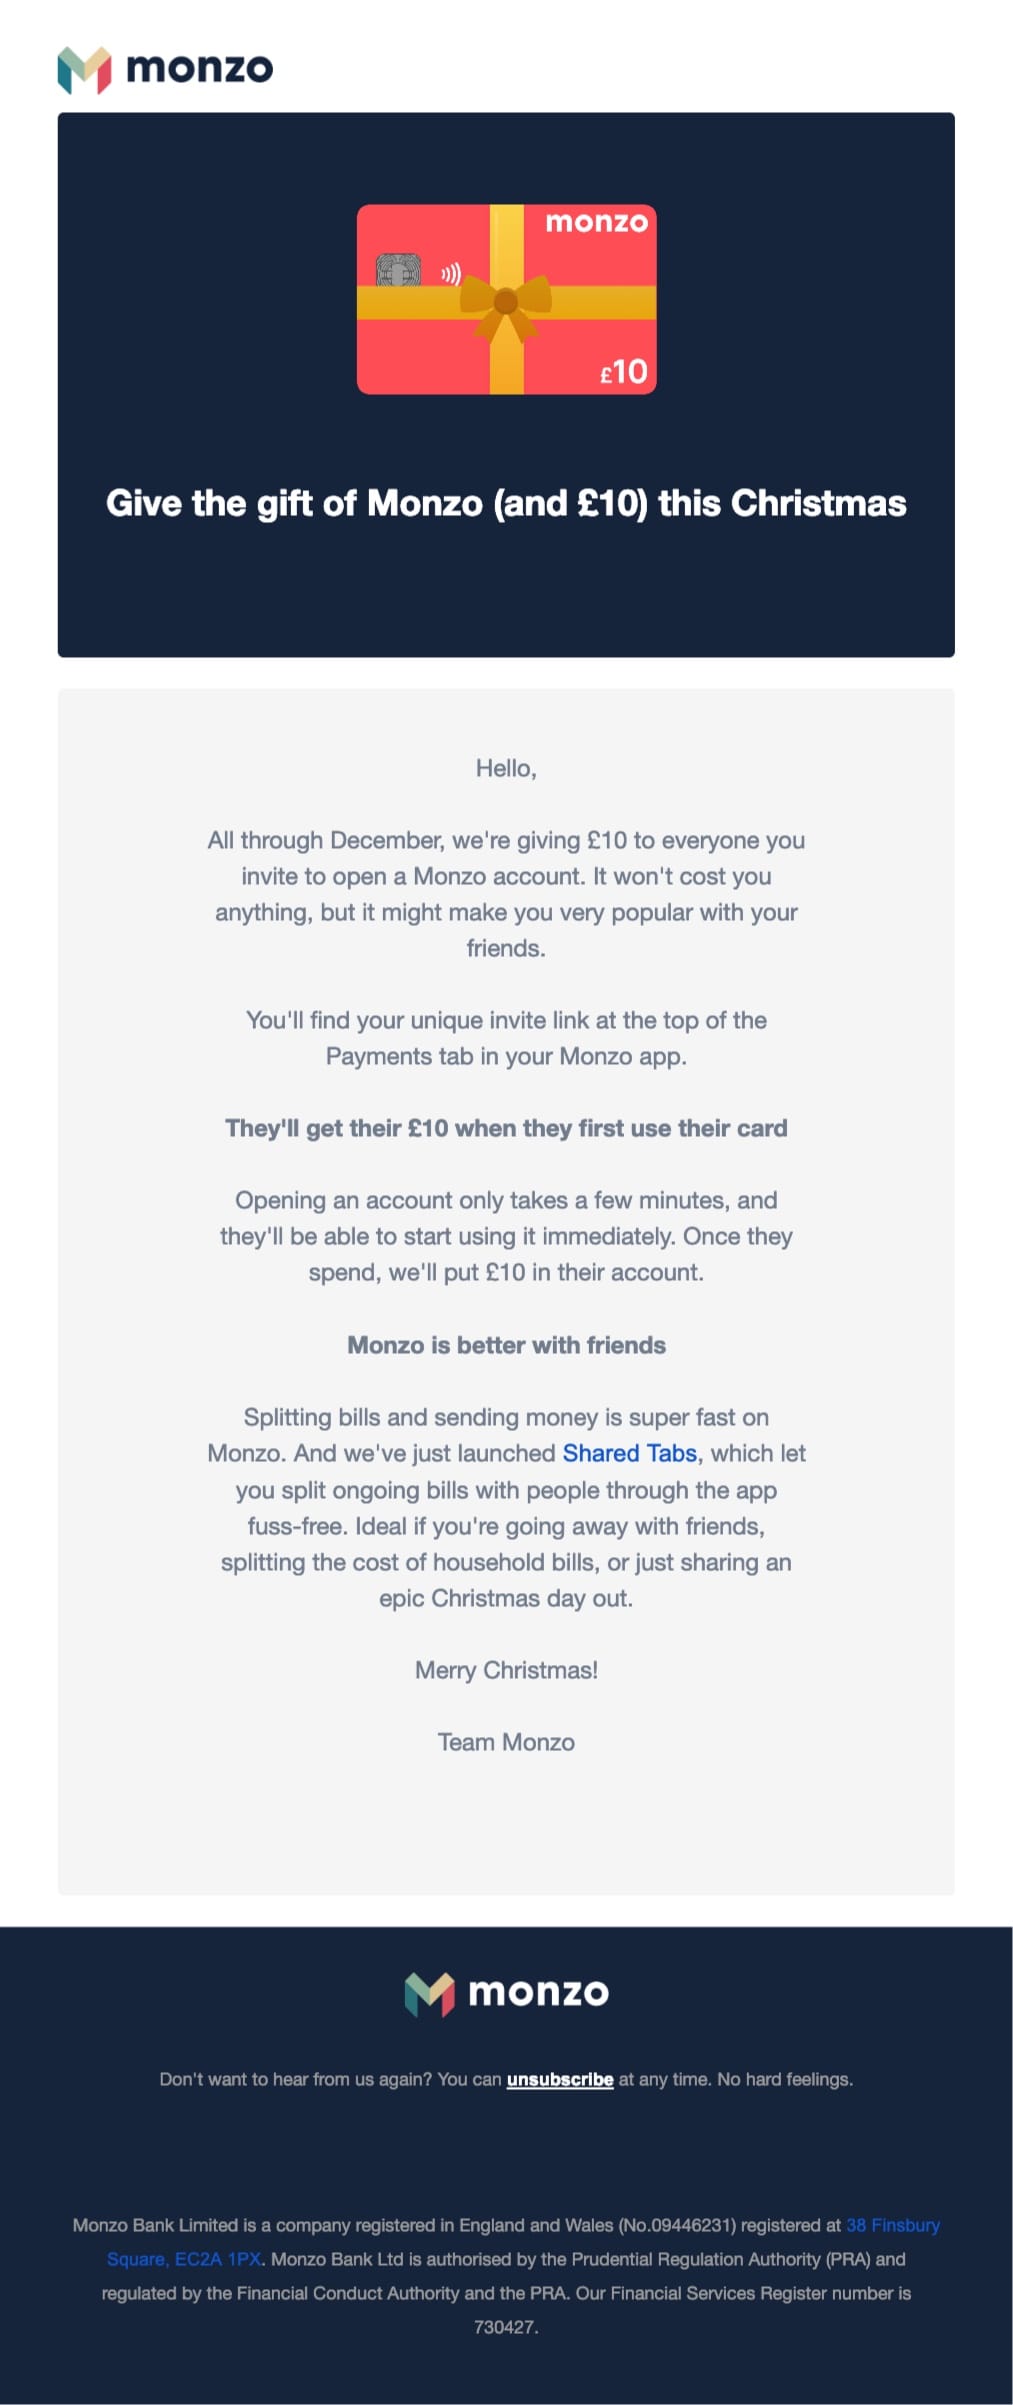 promotional email example monzo (holiday offer)